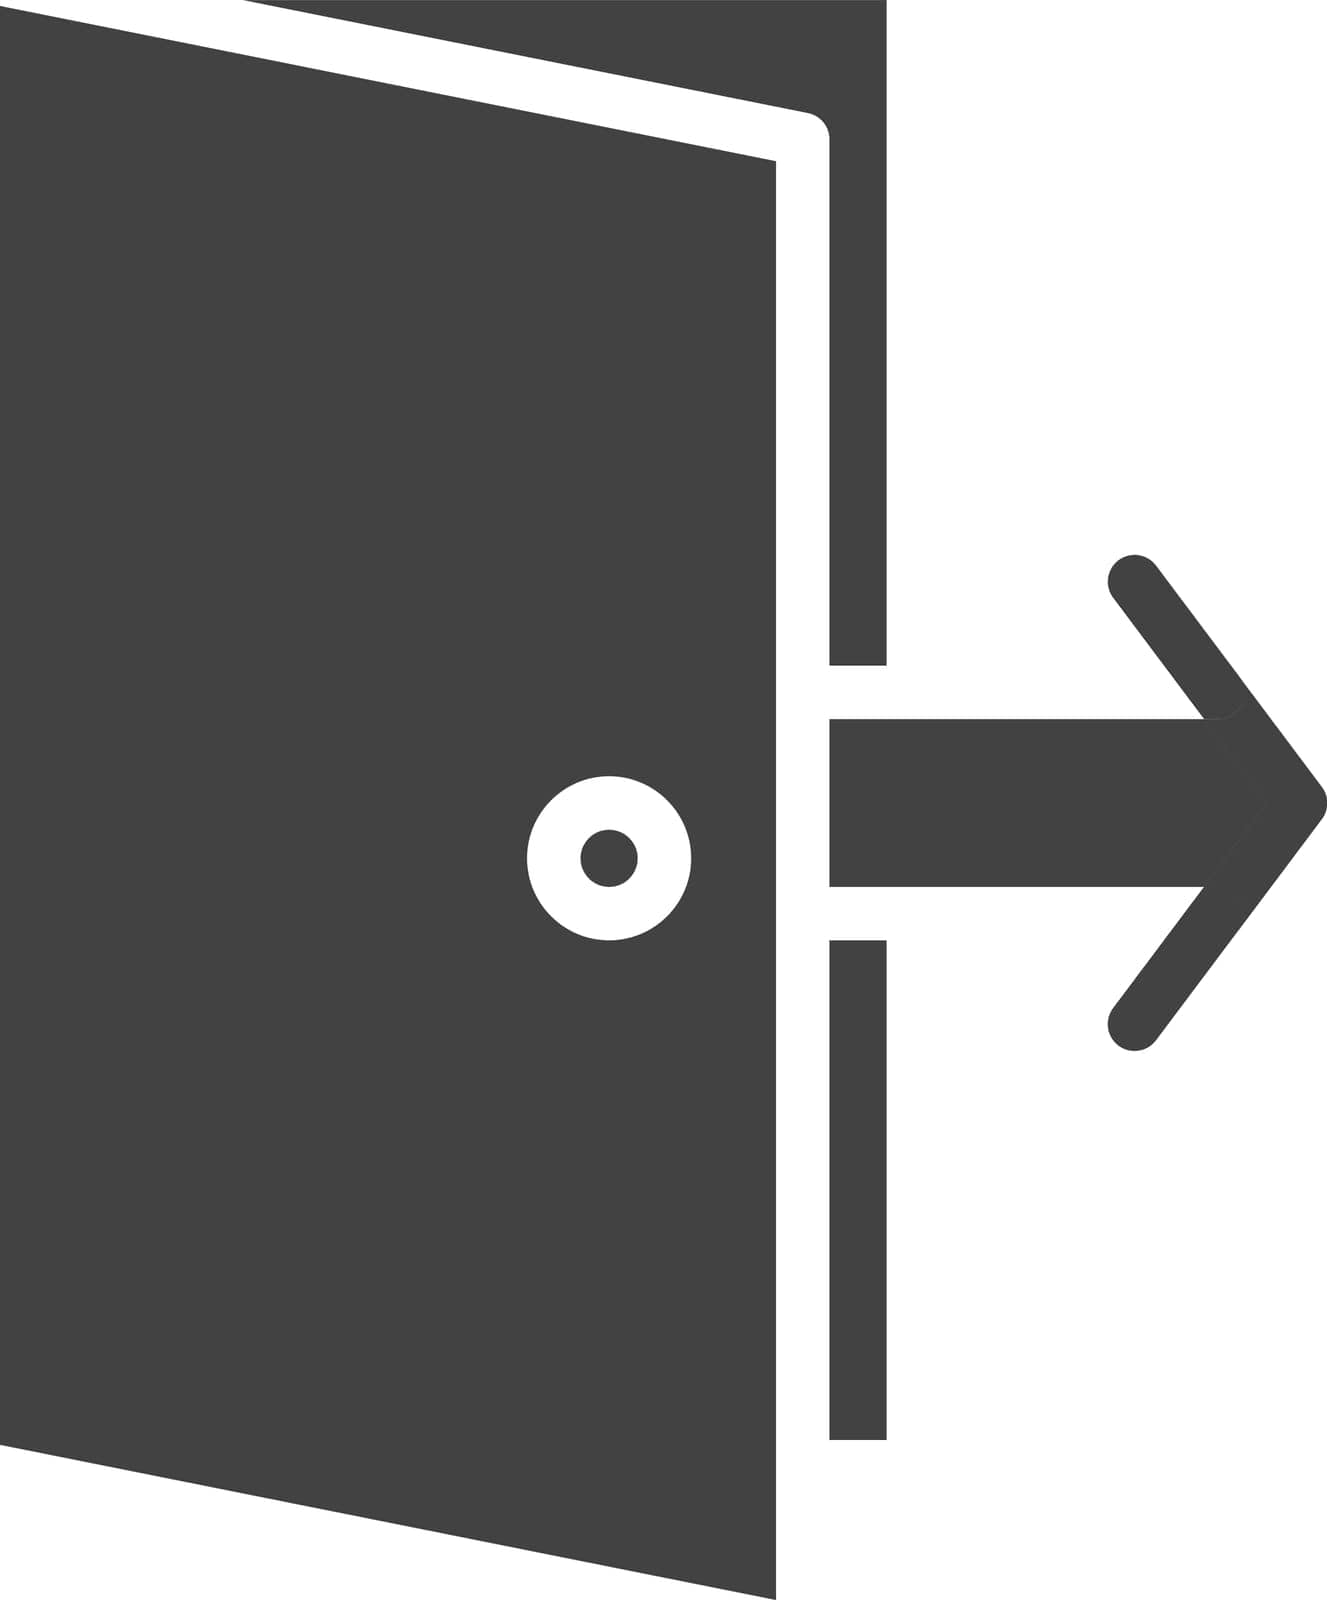 Exit Door Icon image. Suitable for mobile application.